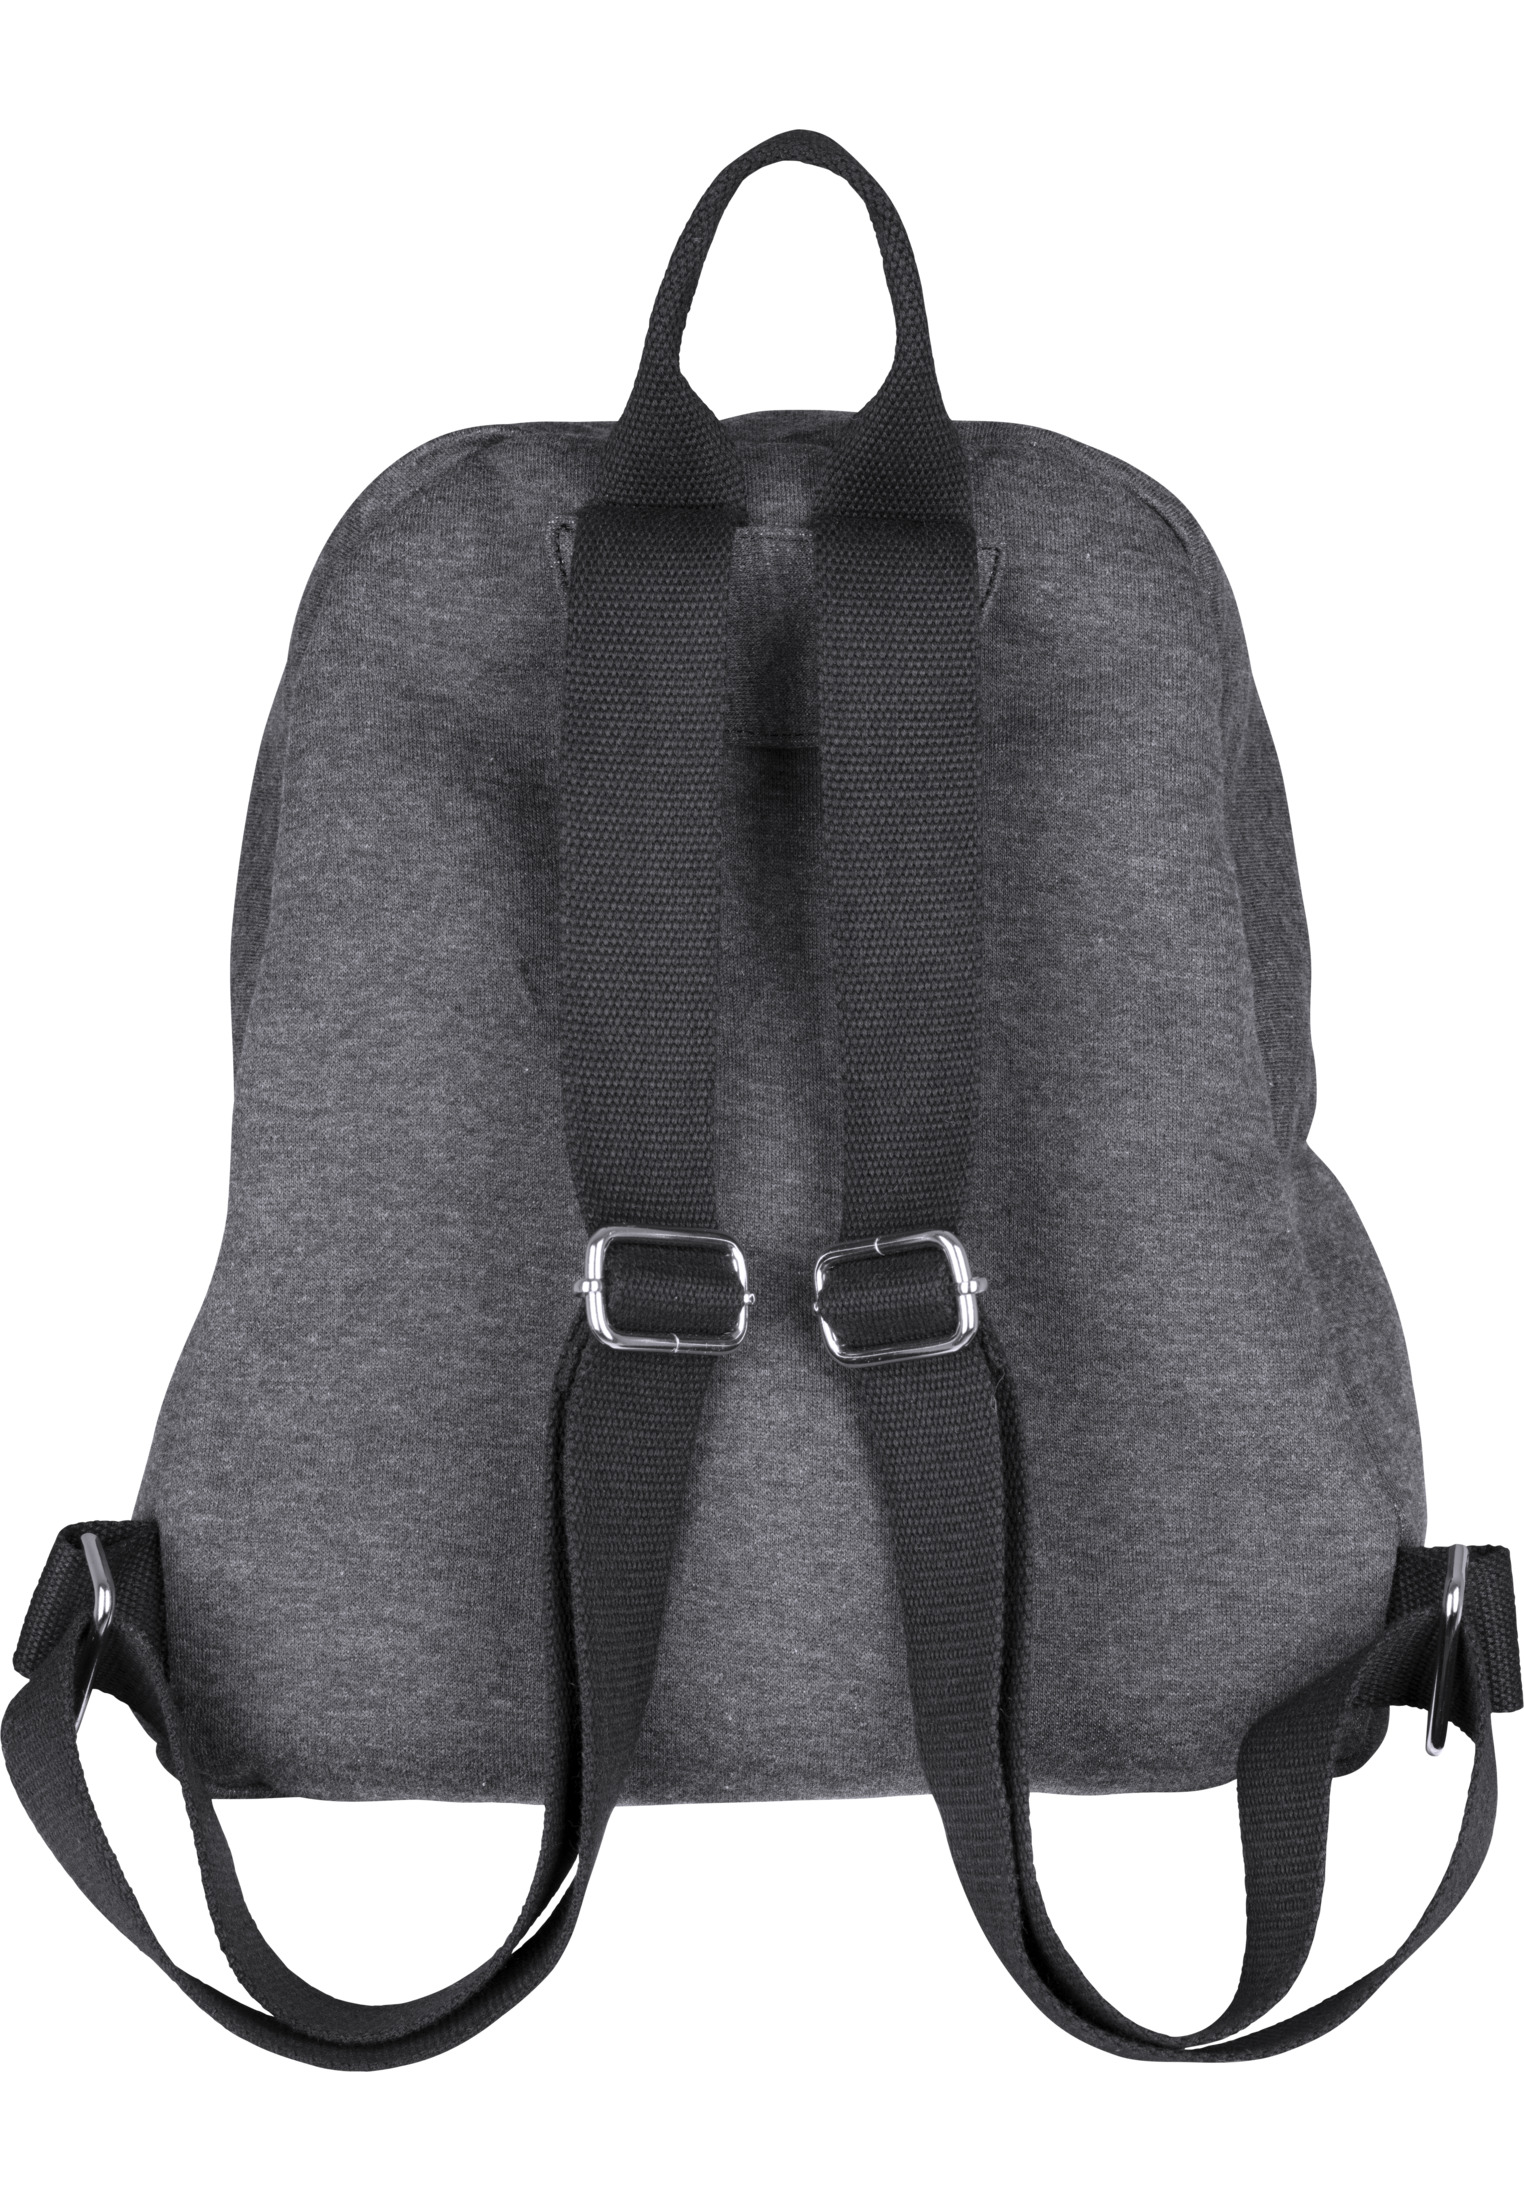 Taschen Sweat Backpack in Farbe charcoal/black